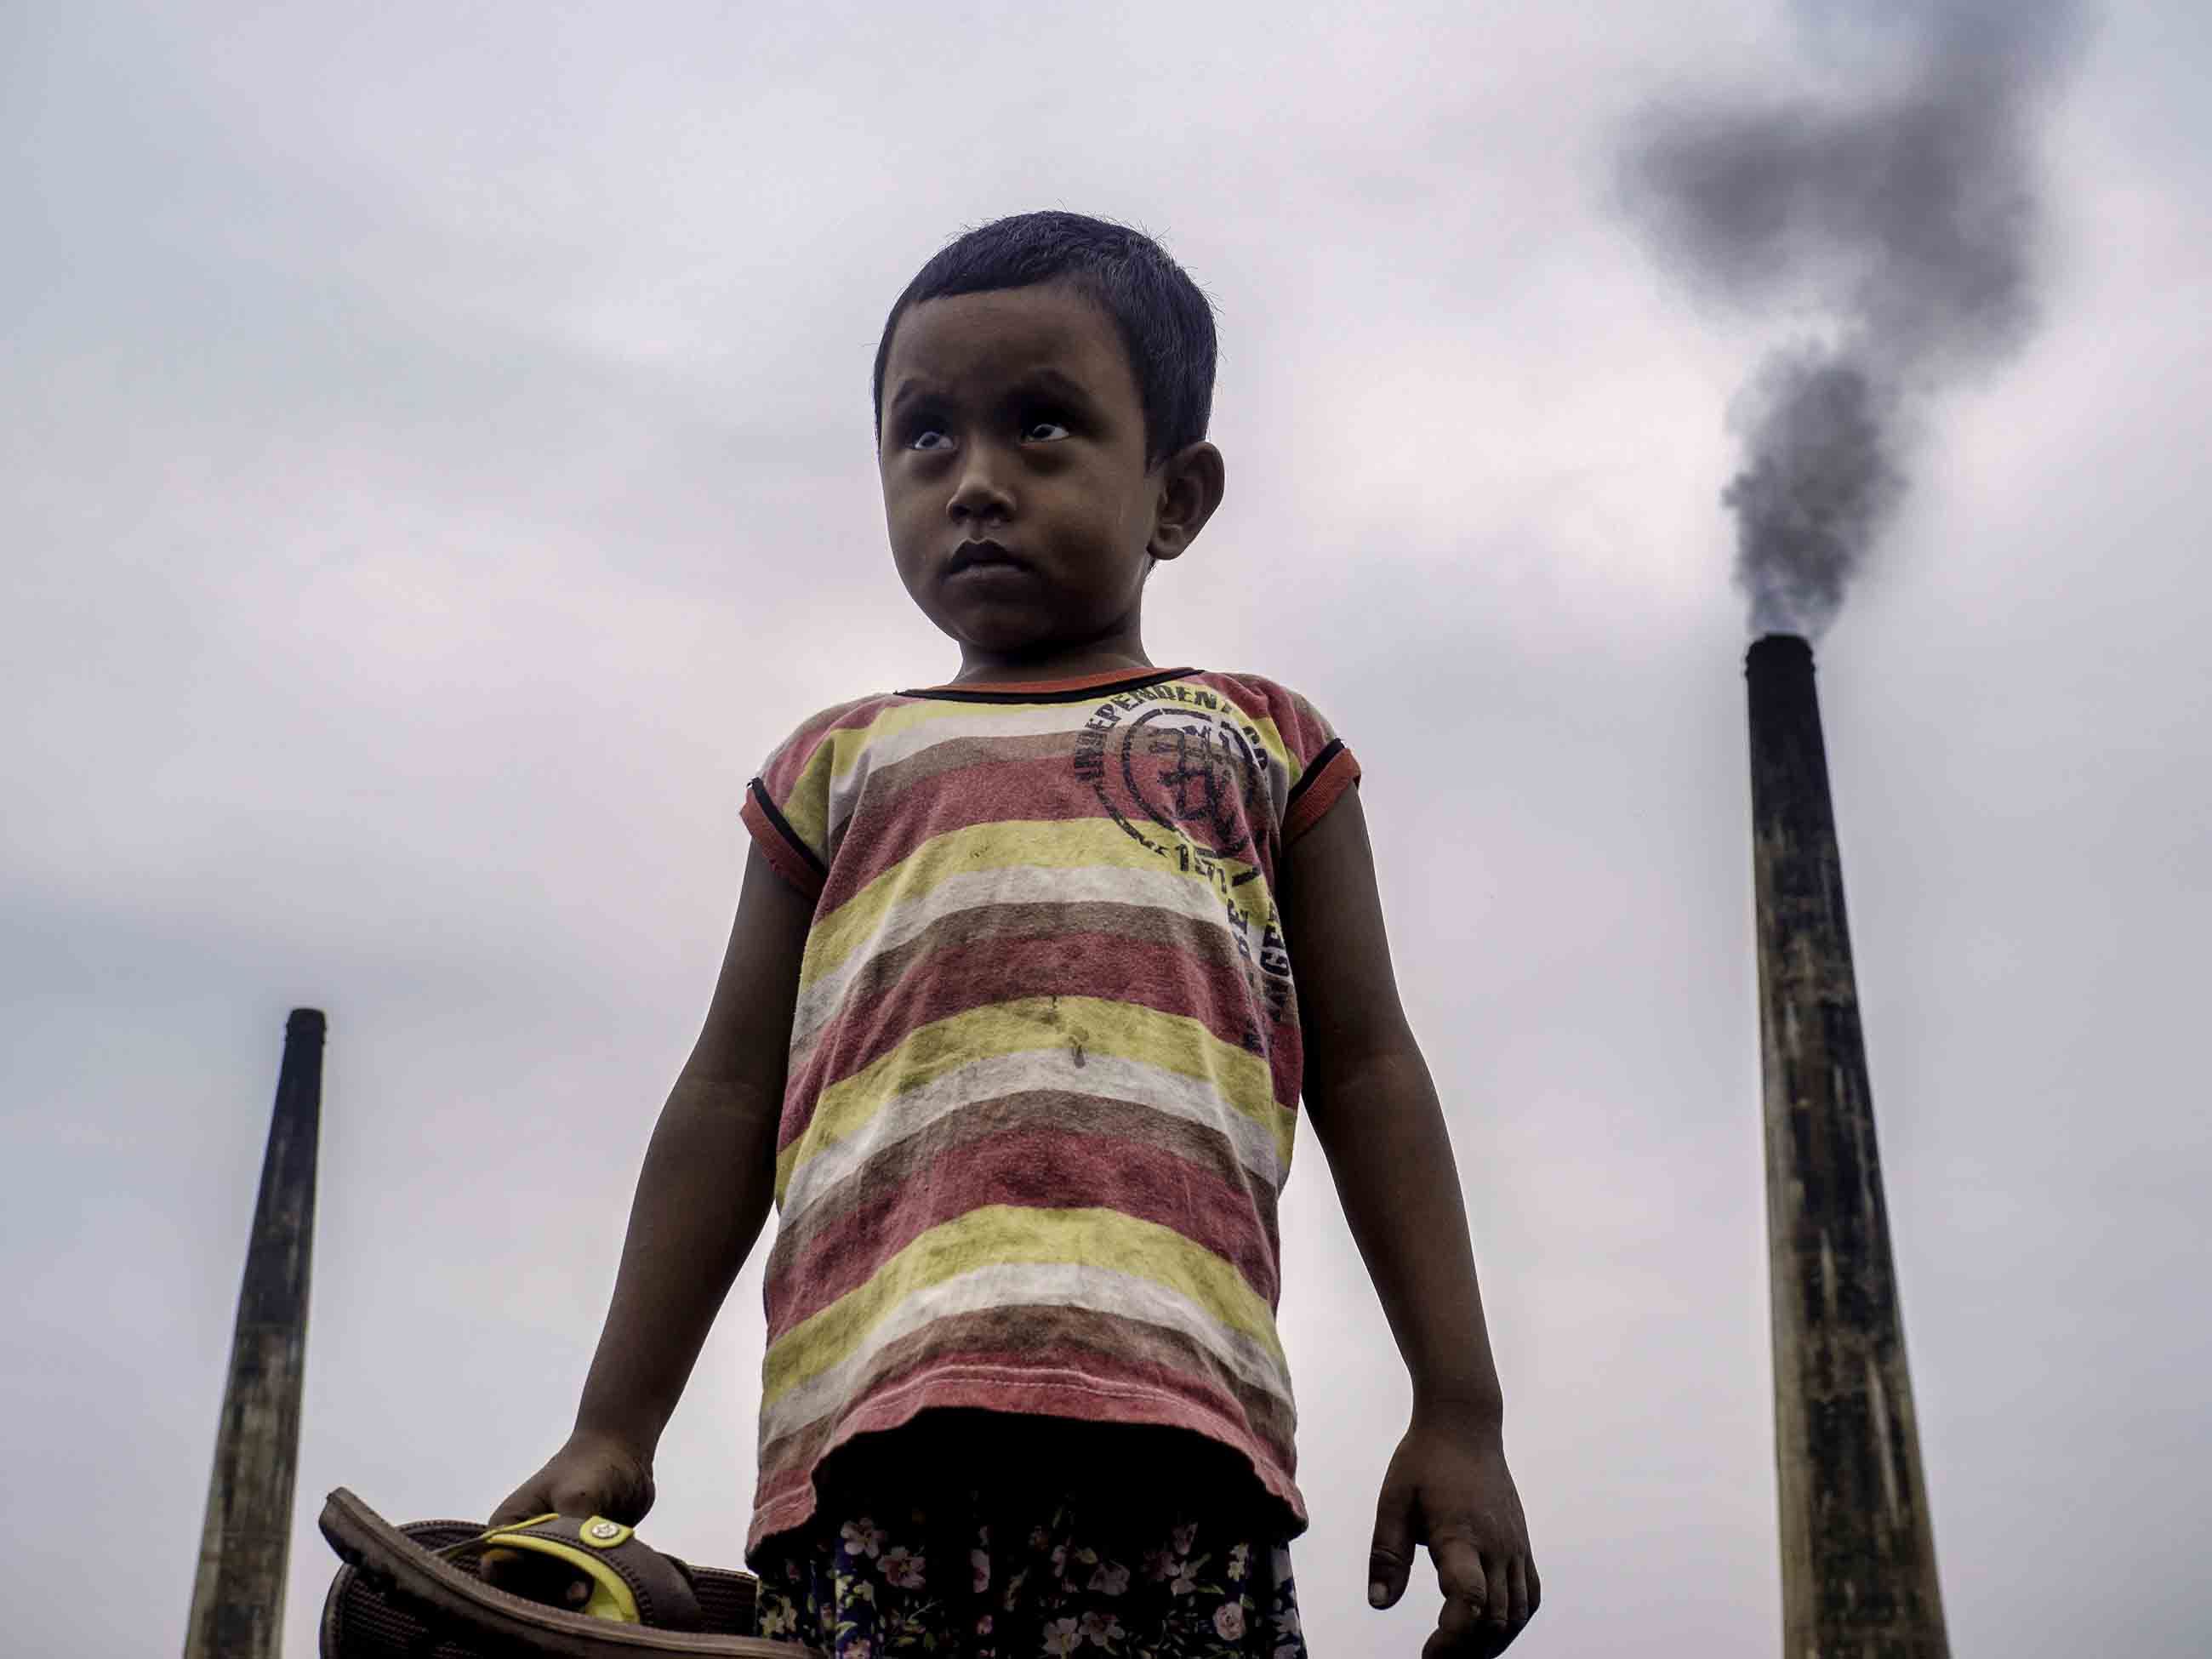 Four-year-old Nayem often plays atop large piles of coal used to fire kilns at a brick factory at the edge of Dhaka, Bangladesh. The chimneys from such factories contribute to some of the worst air pollution in the world. Image by Larry C. Price. Bangladesh, 2018.